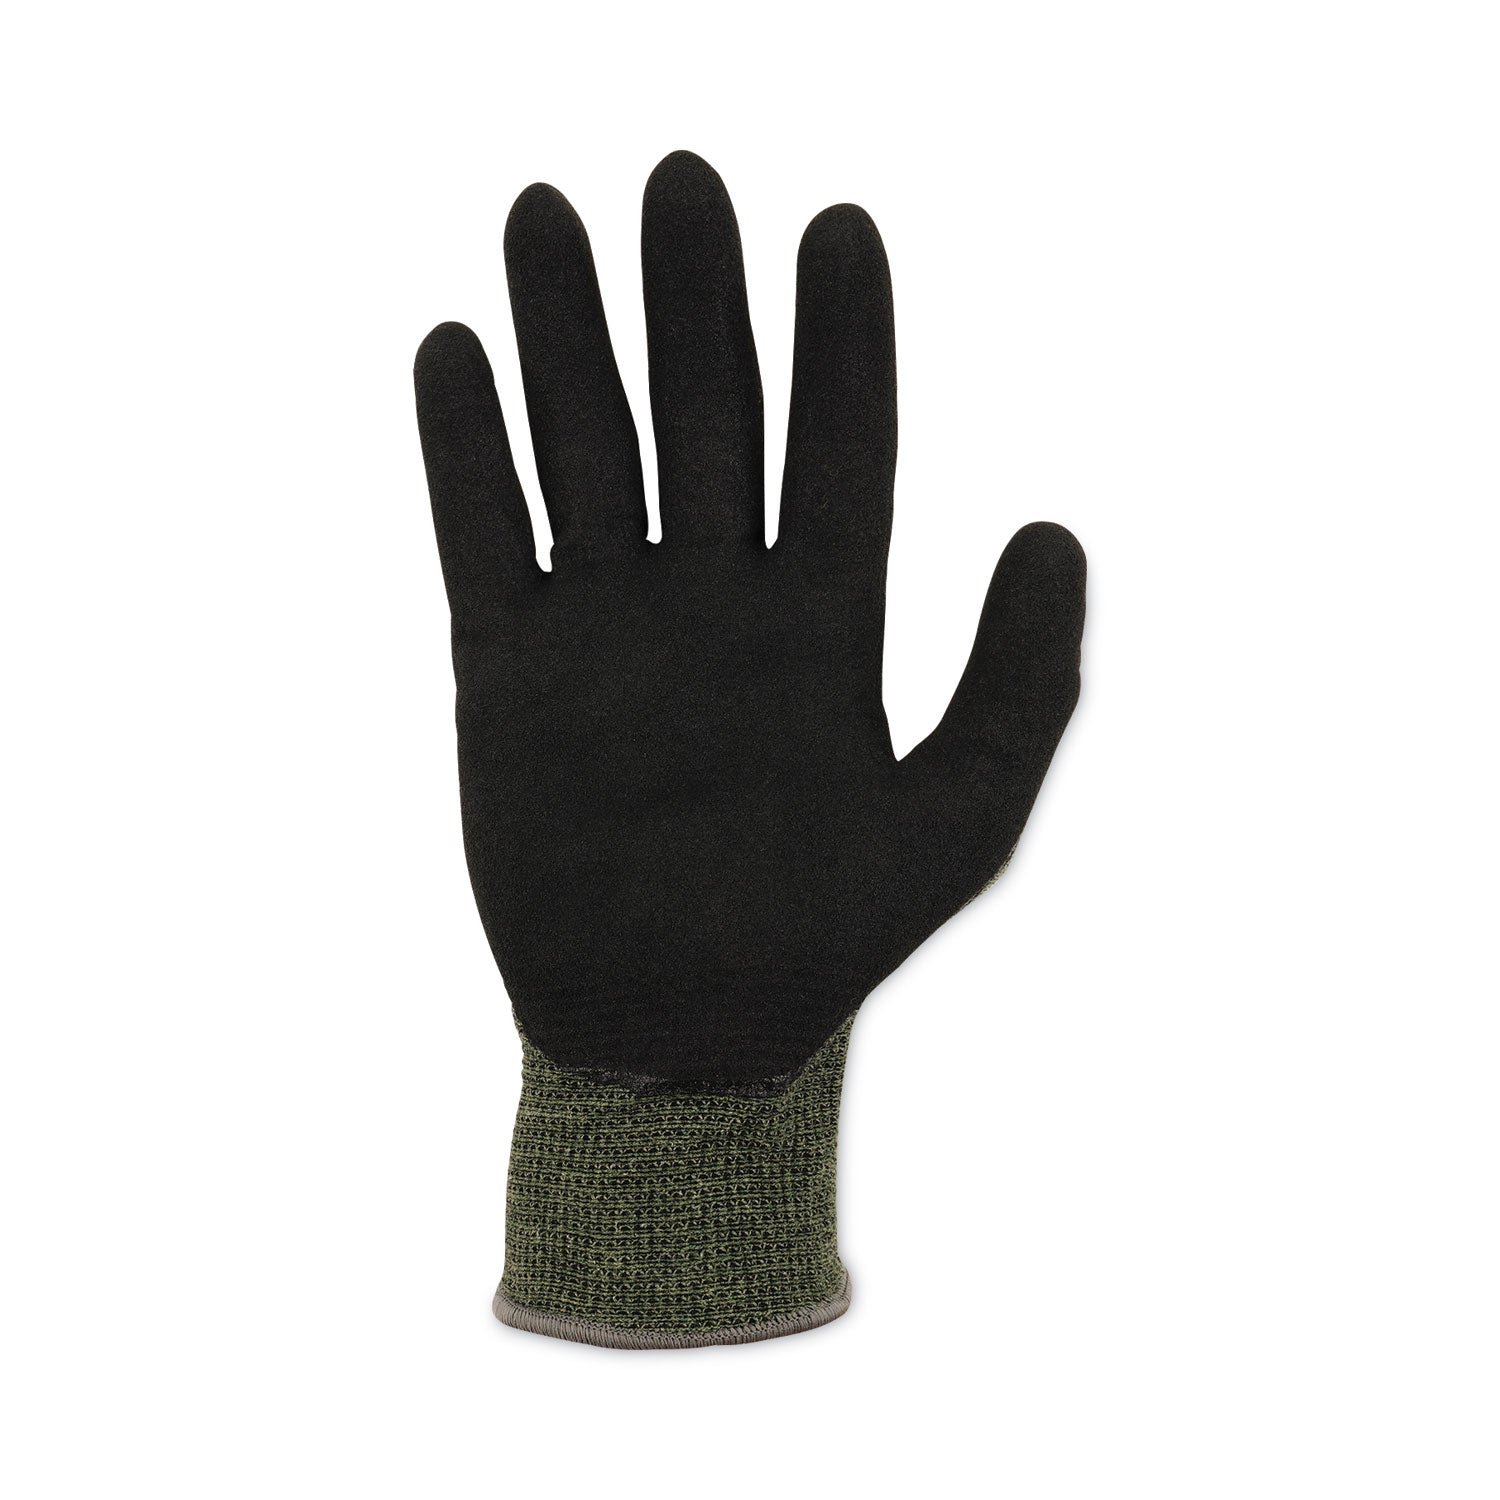 proflex-7042-ansi-a4-nitrile-coated-cr-gloves-green-2x-large-pair-ships-in-1-3-business-days_ego10346 - 4